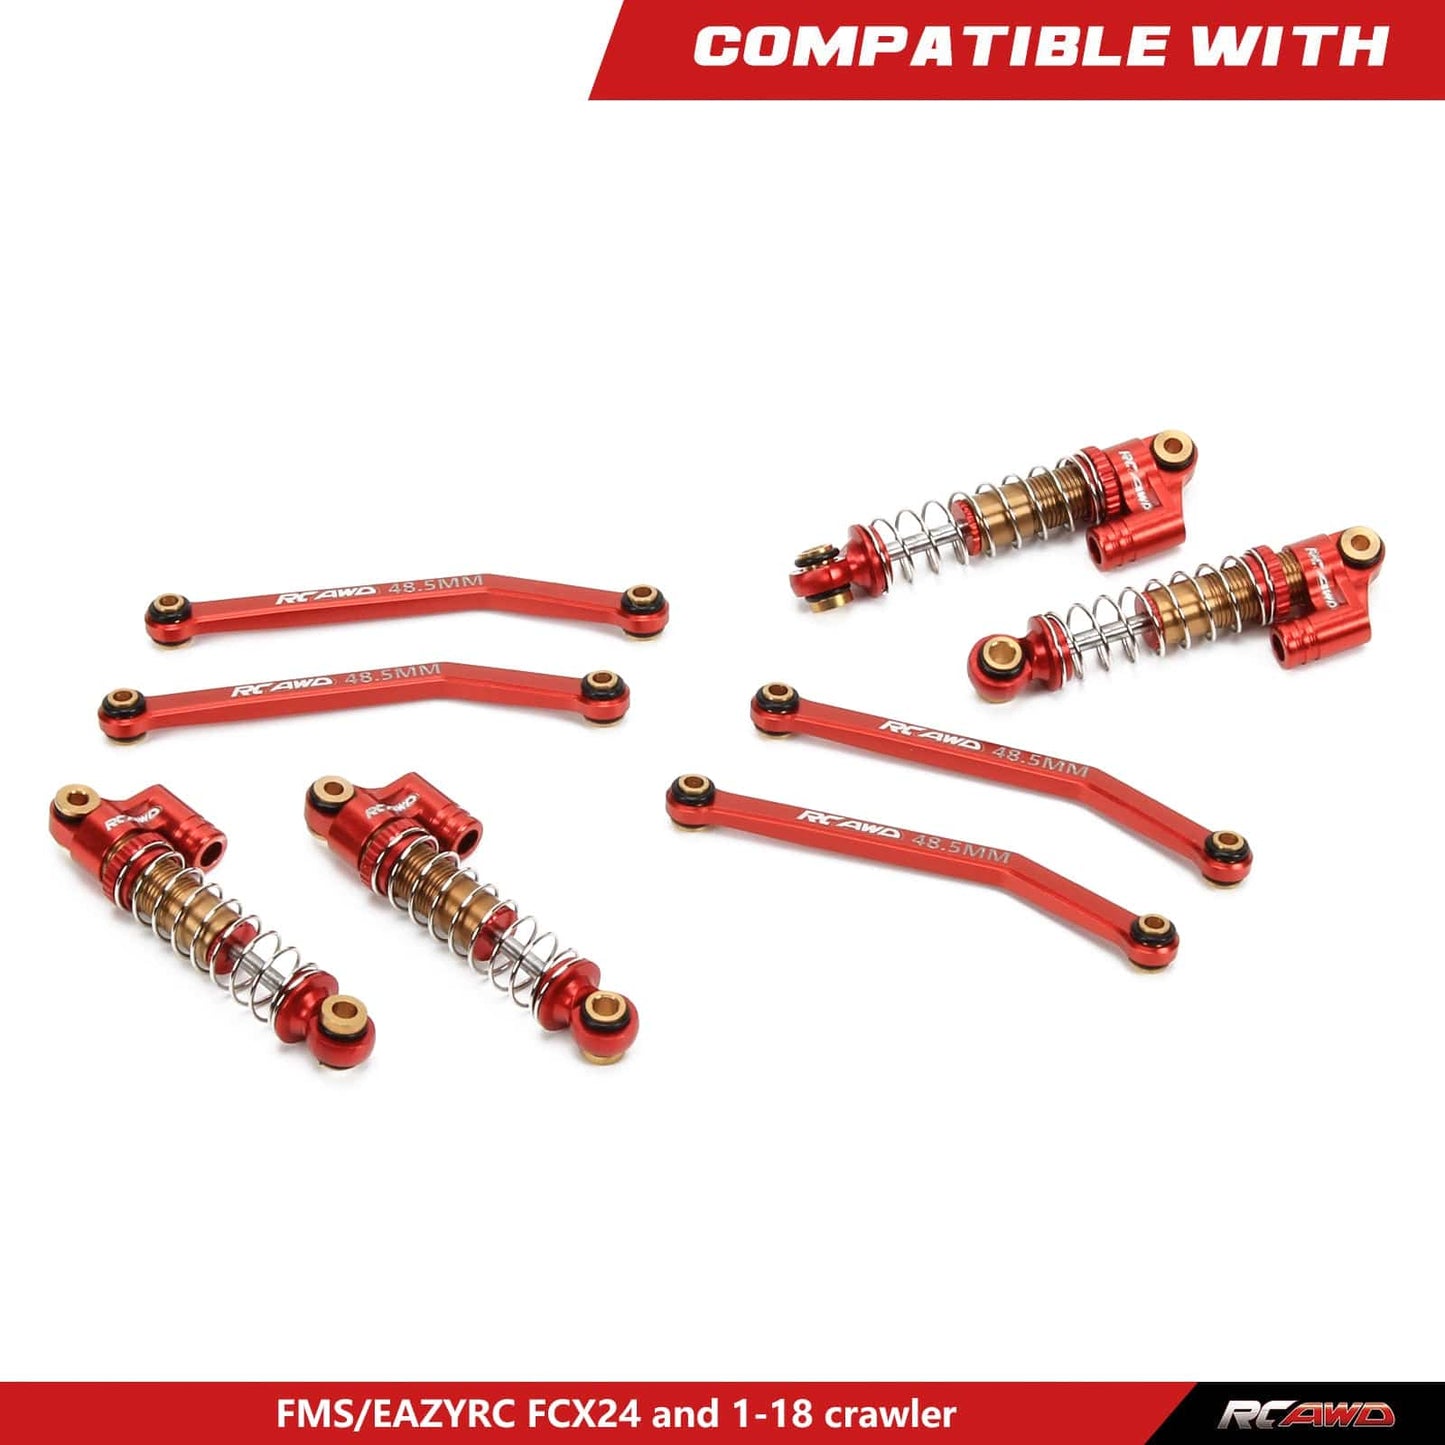 RCAWD FMS FCX24 RCAWD FMS FCX24 Upgrades Double Barrel Damper Shock Absorber with 48.5mm Links